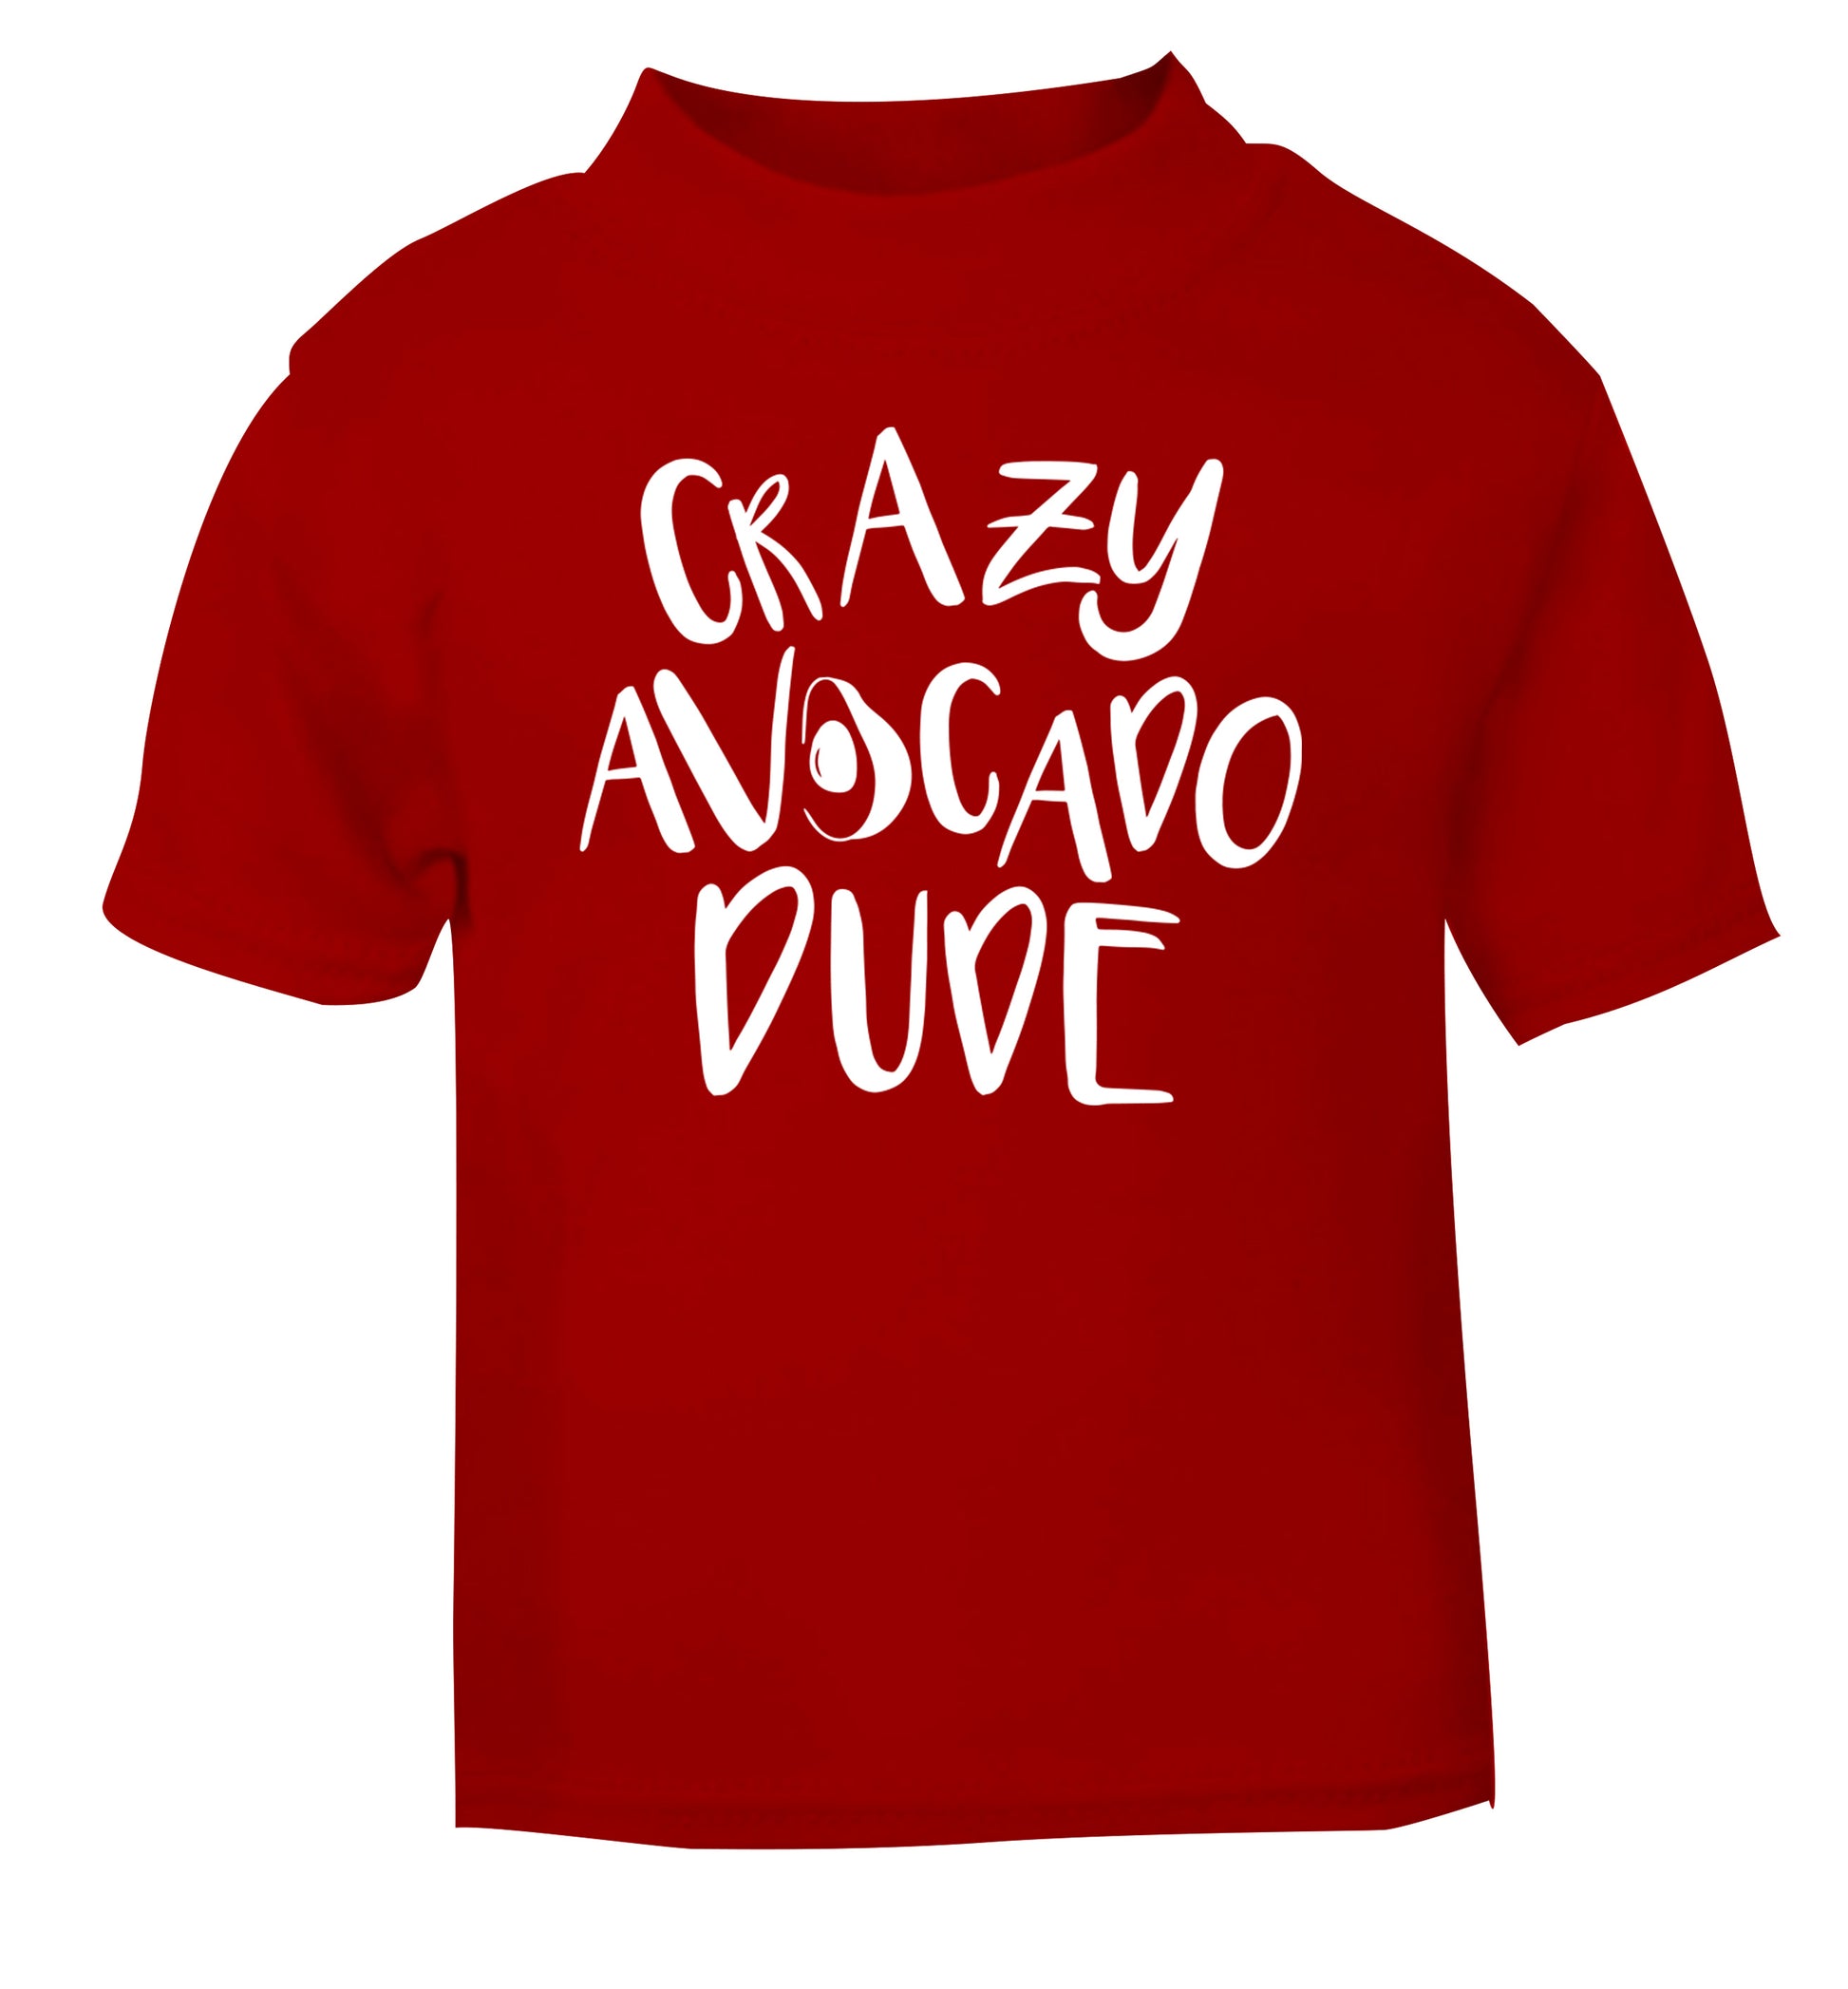 Crazy avocado dude red Baby Toddler Tshirt 2 Years